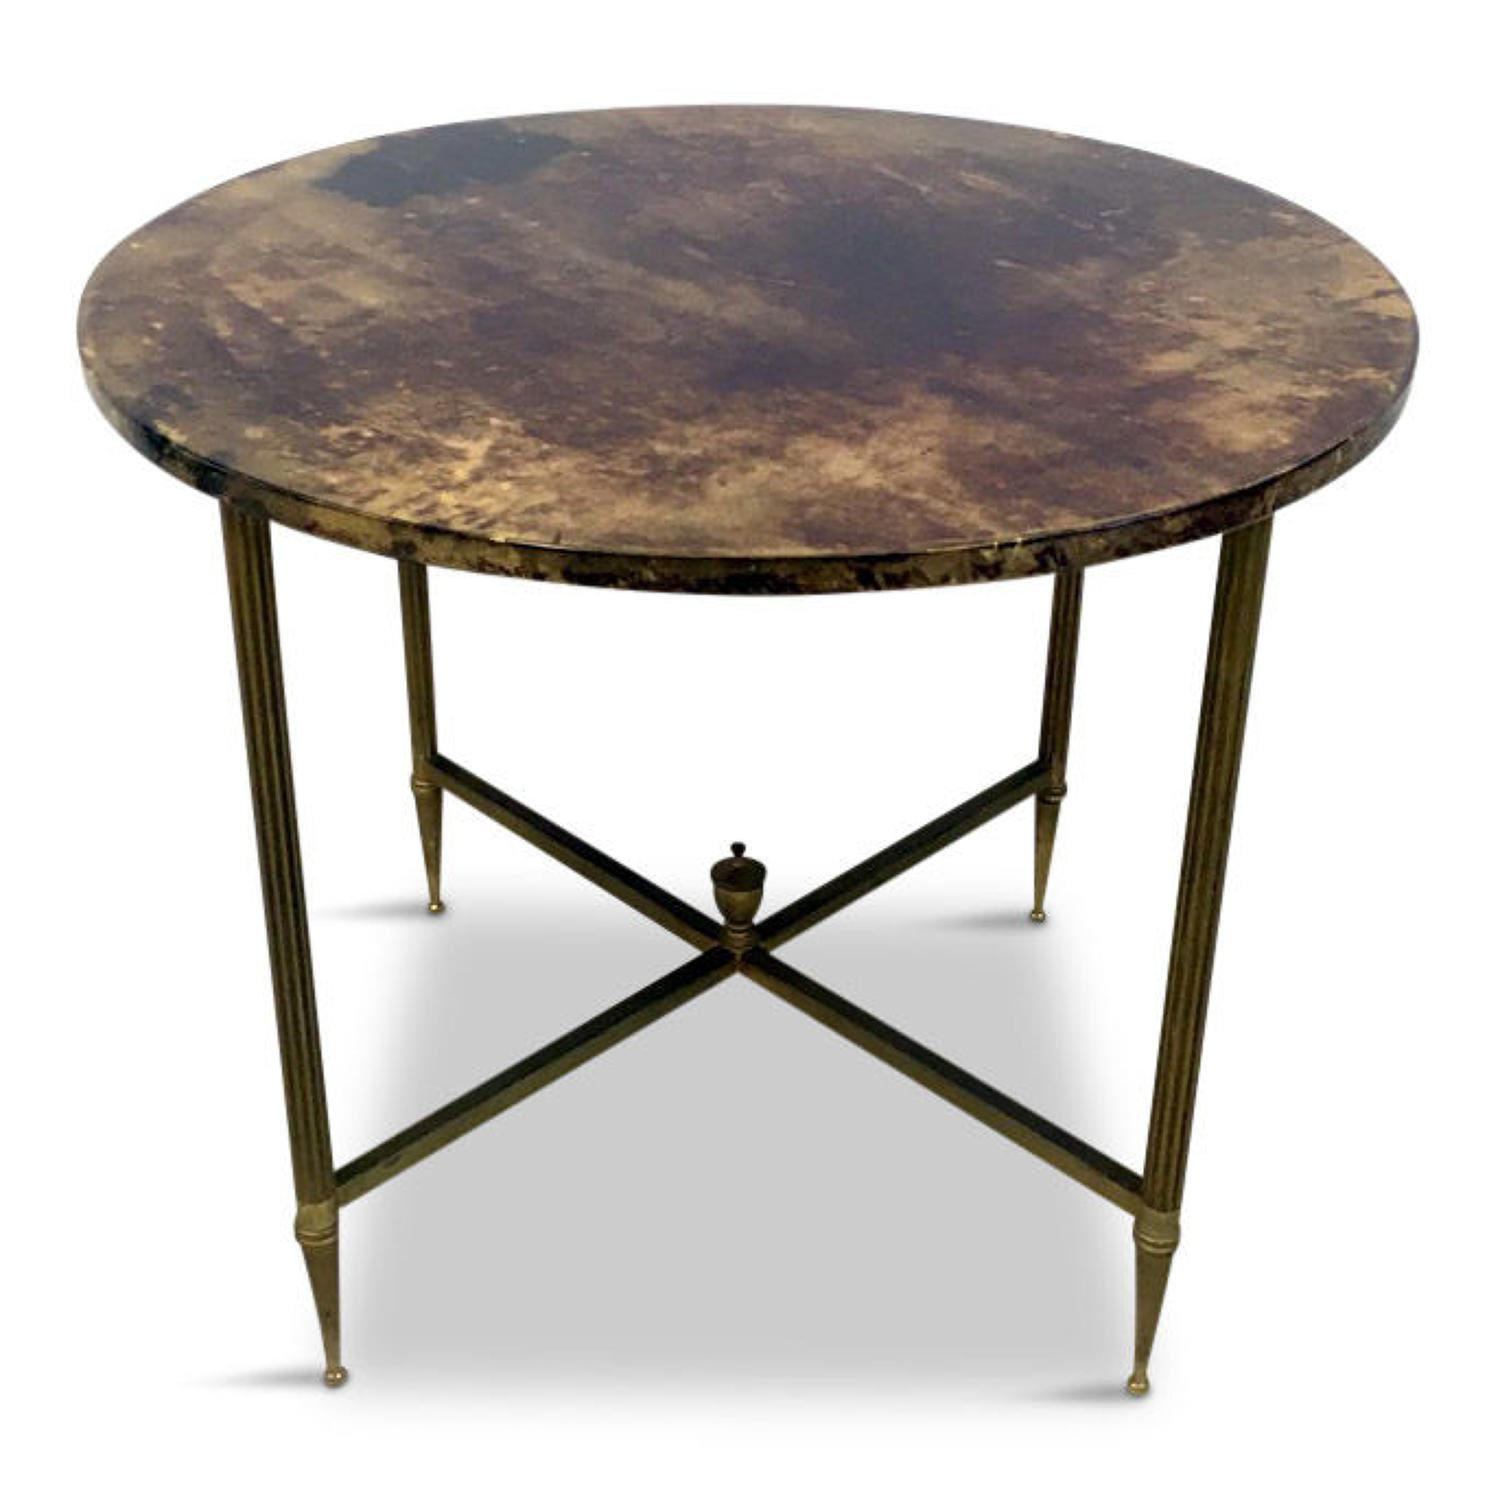 Lacquered goatskin and brass coffee or side table by Tura